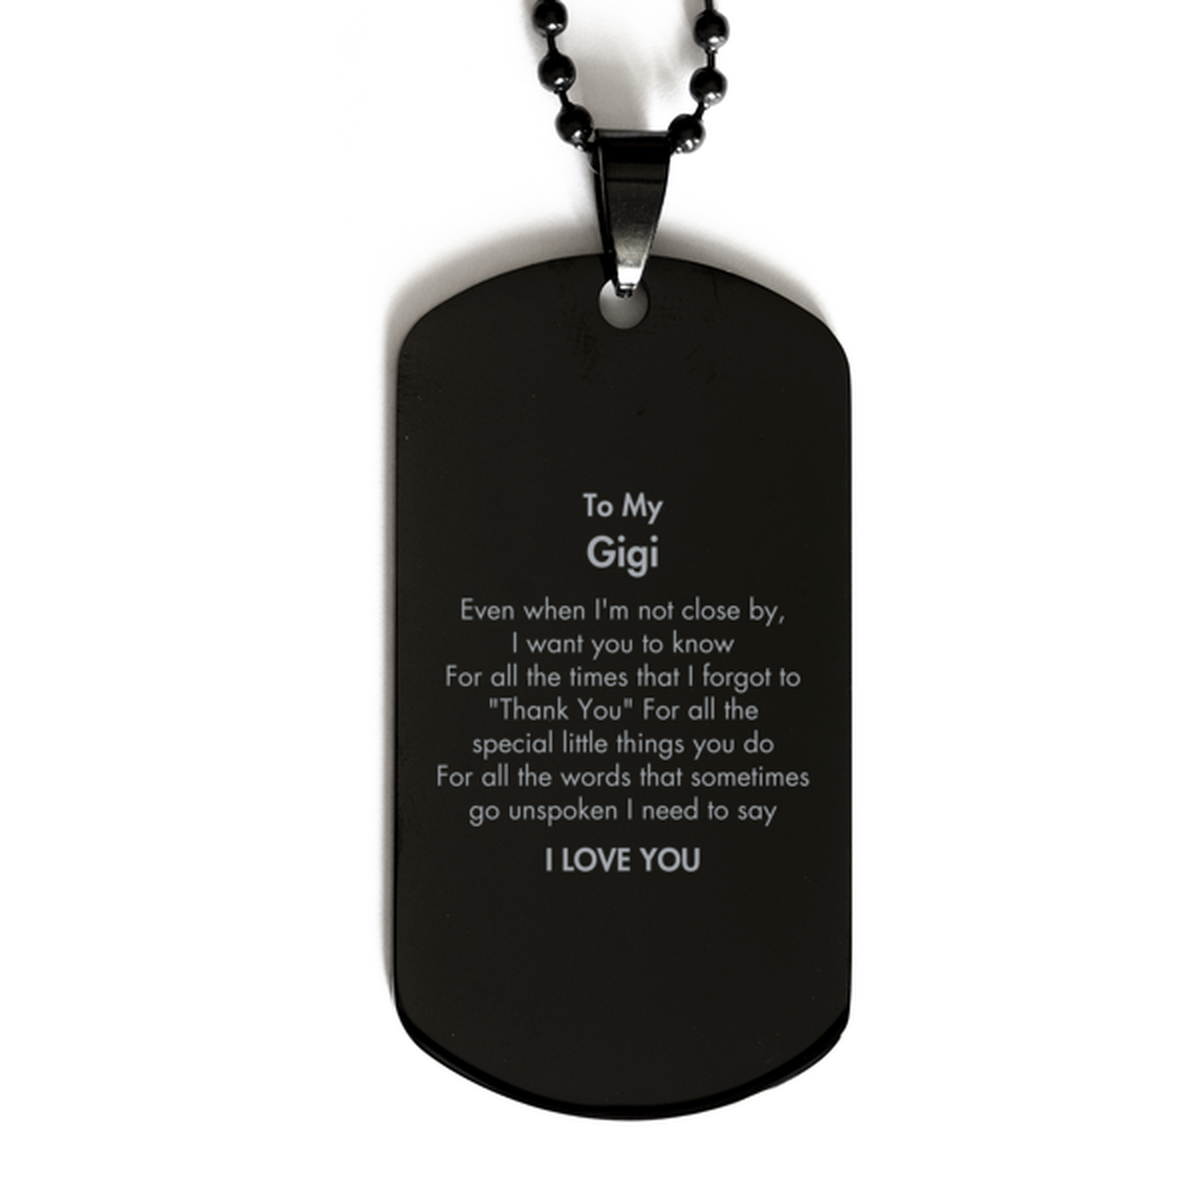 Thank You Gifts for Gigi, Keepsake Black Dog Tag Gifts for Gigi Birthday Mother's day Father's Day Gigi For all the words That sometimes go unspoken I need to say I LOVE YOU